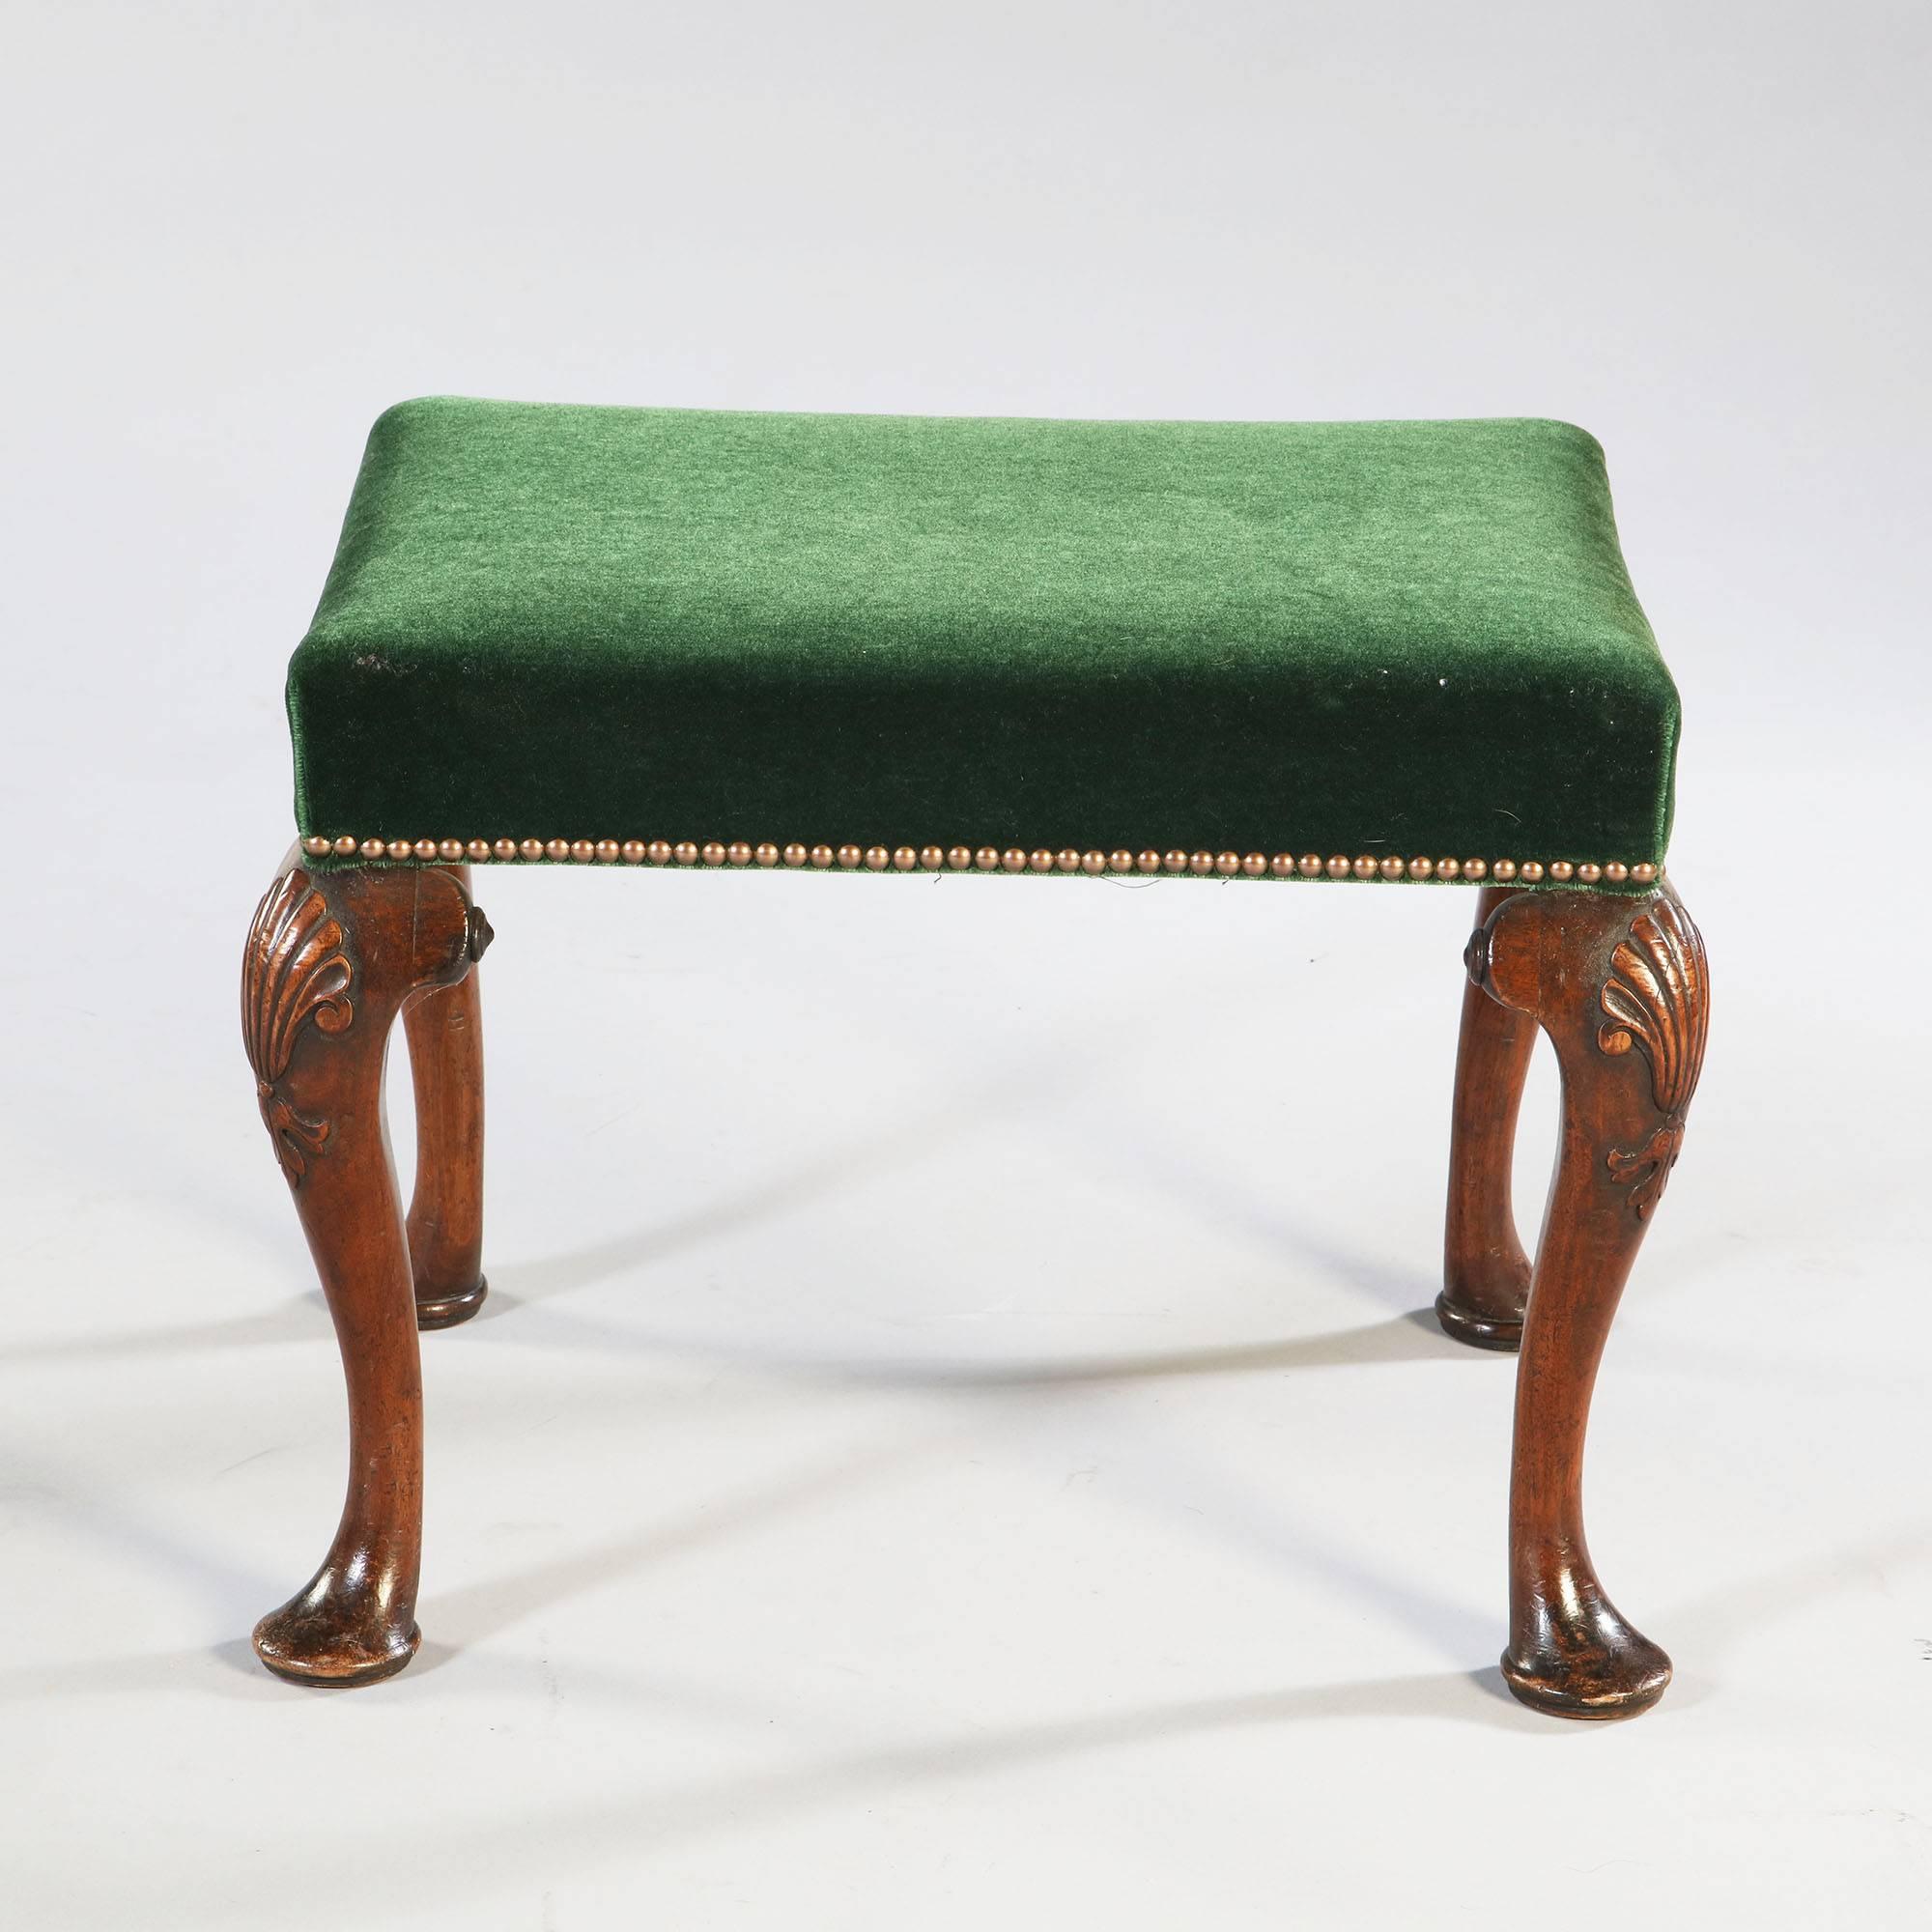 A fine early 18th century walnut stool with cabriole legs with carved shells and terminating in pad feet. Now upholstered in a green velvet.